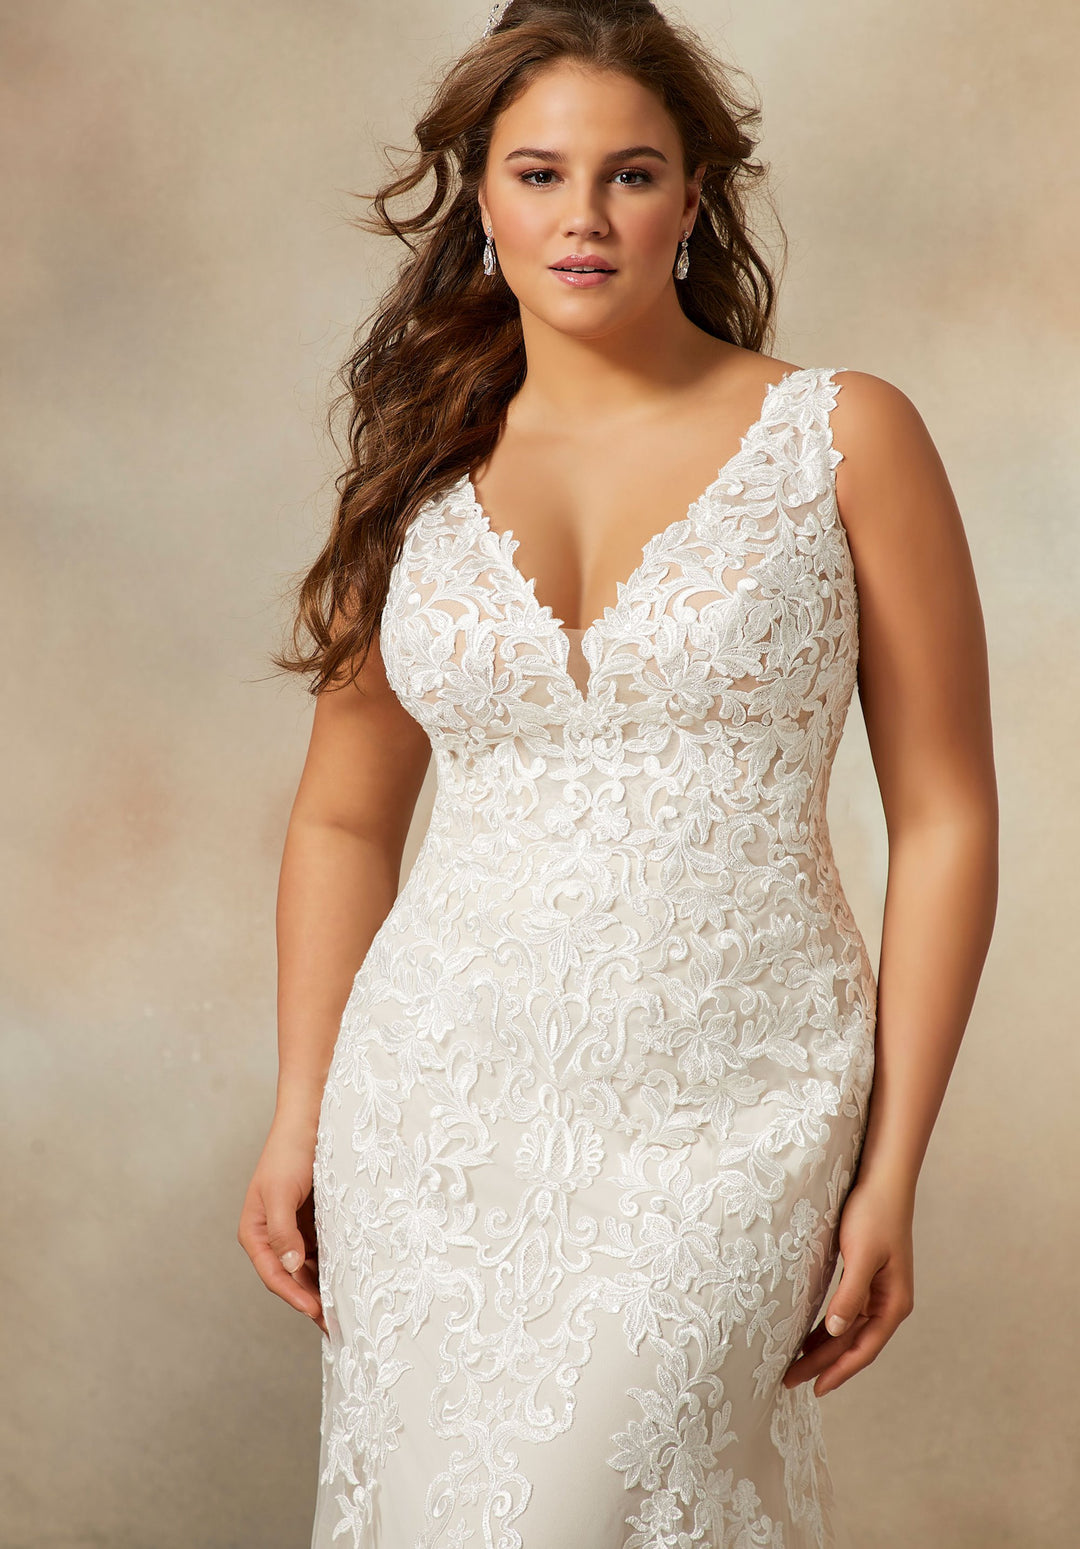 Mori Lee Gown Style 2039 Size 22W